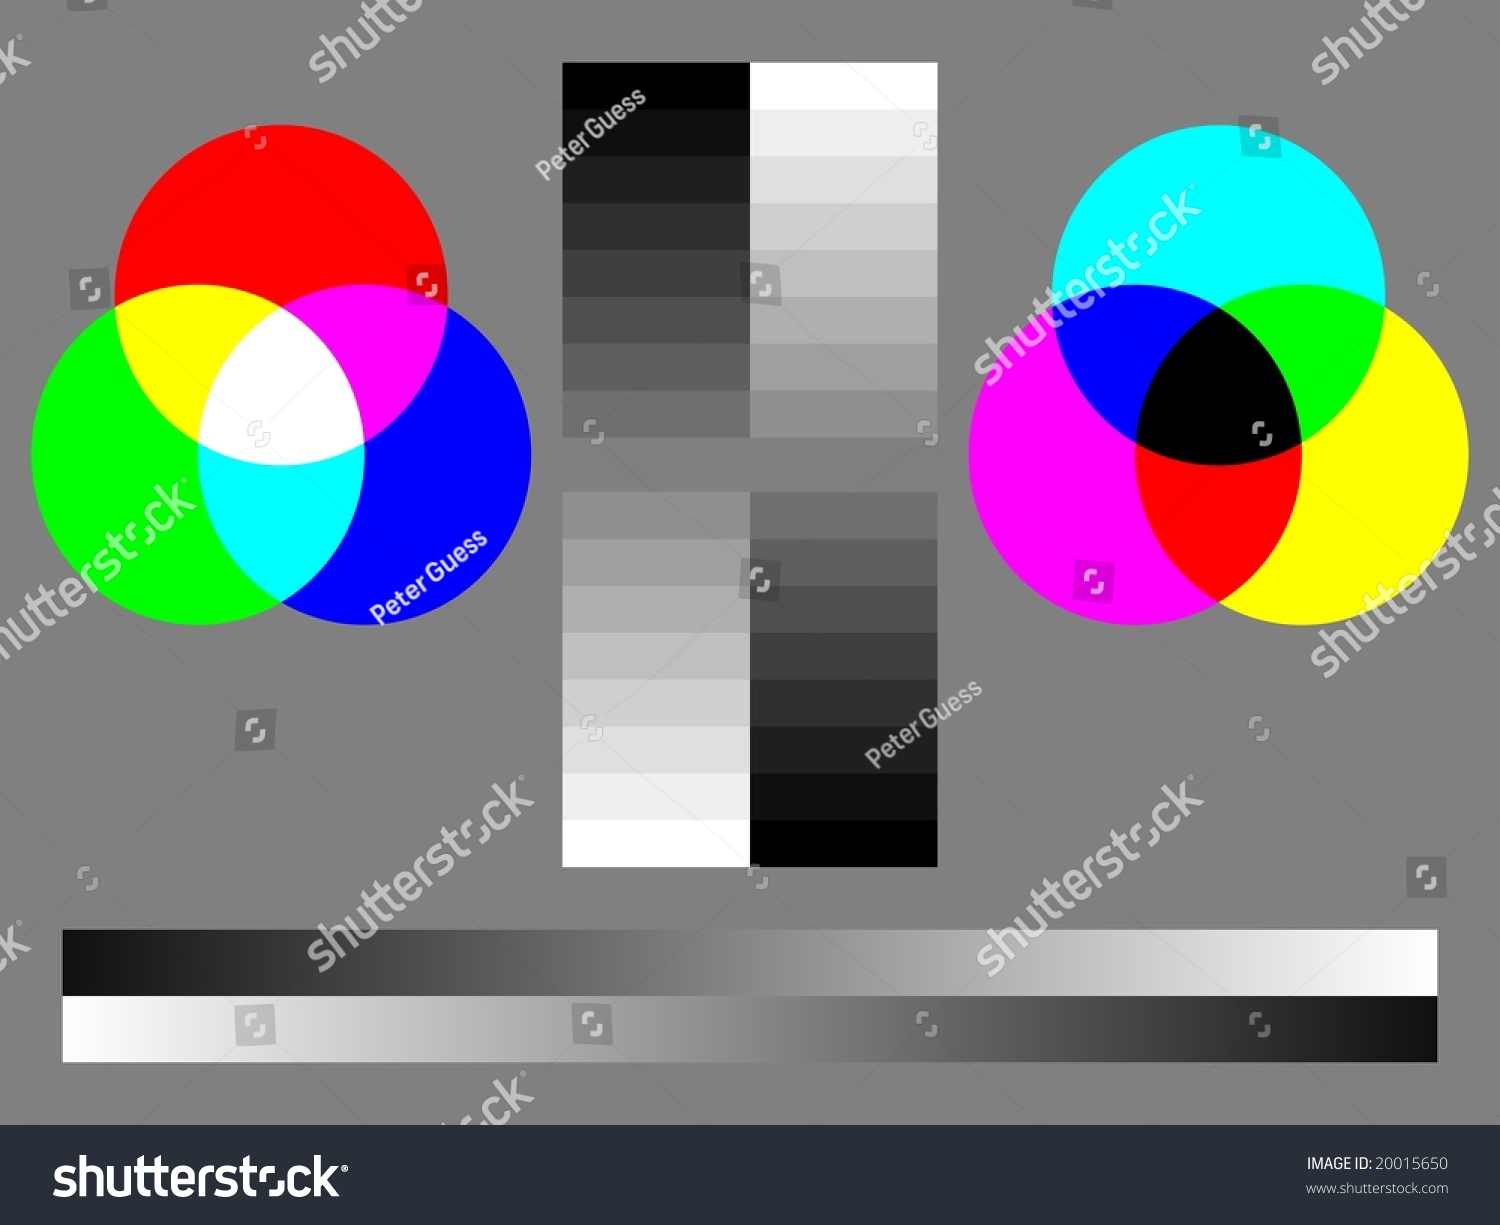 Monitor Calibration Color Test Chart With Rgb, Cmyk, 16Step Grayscale